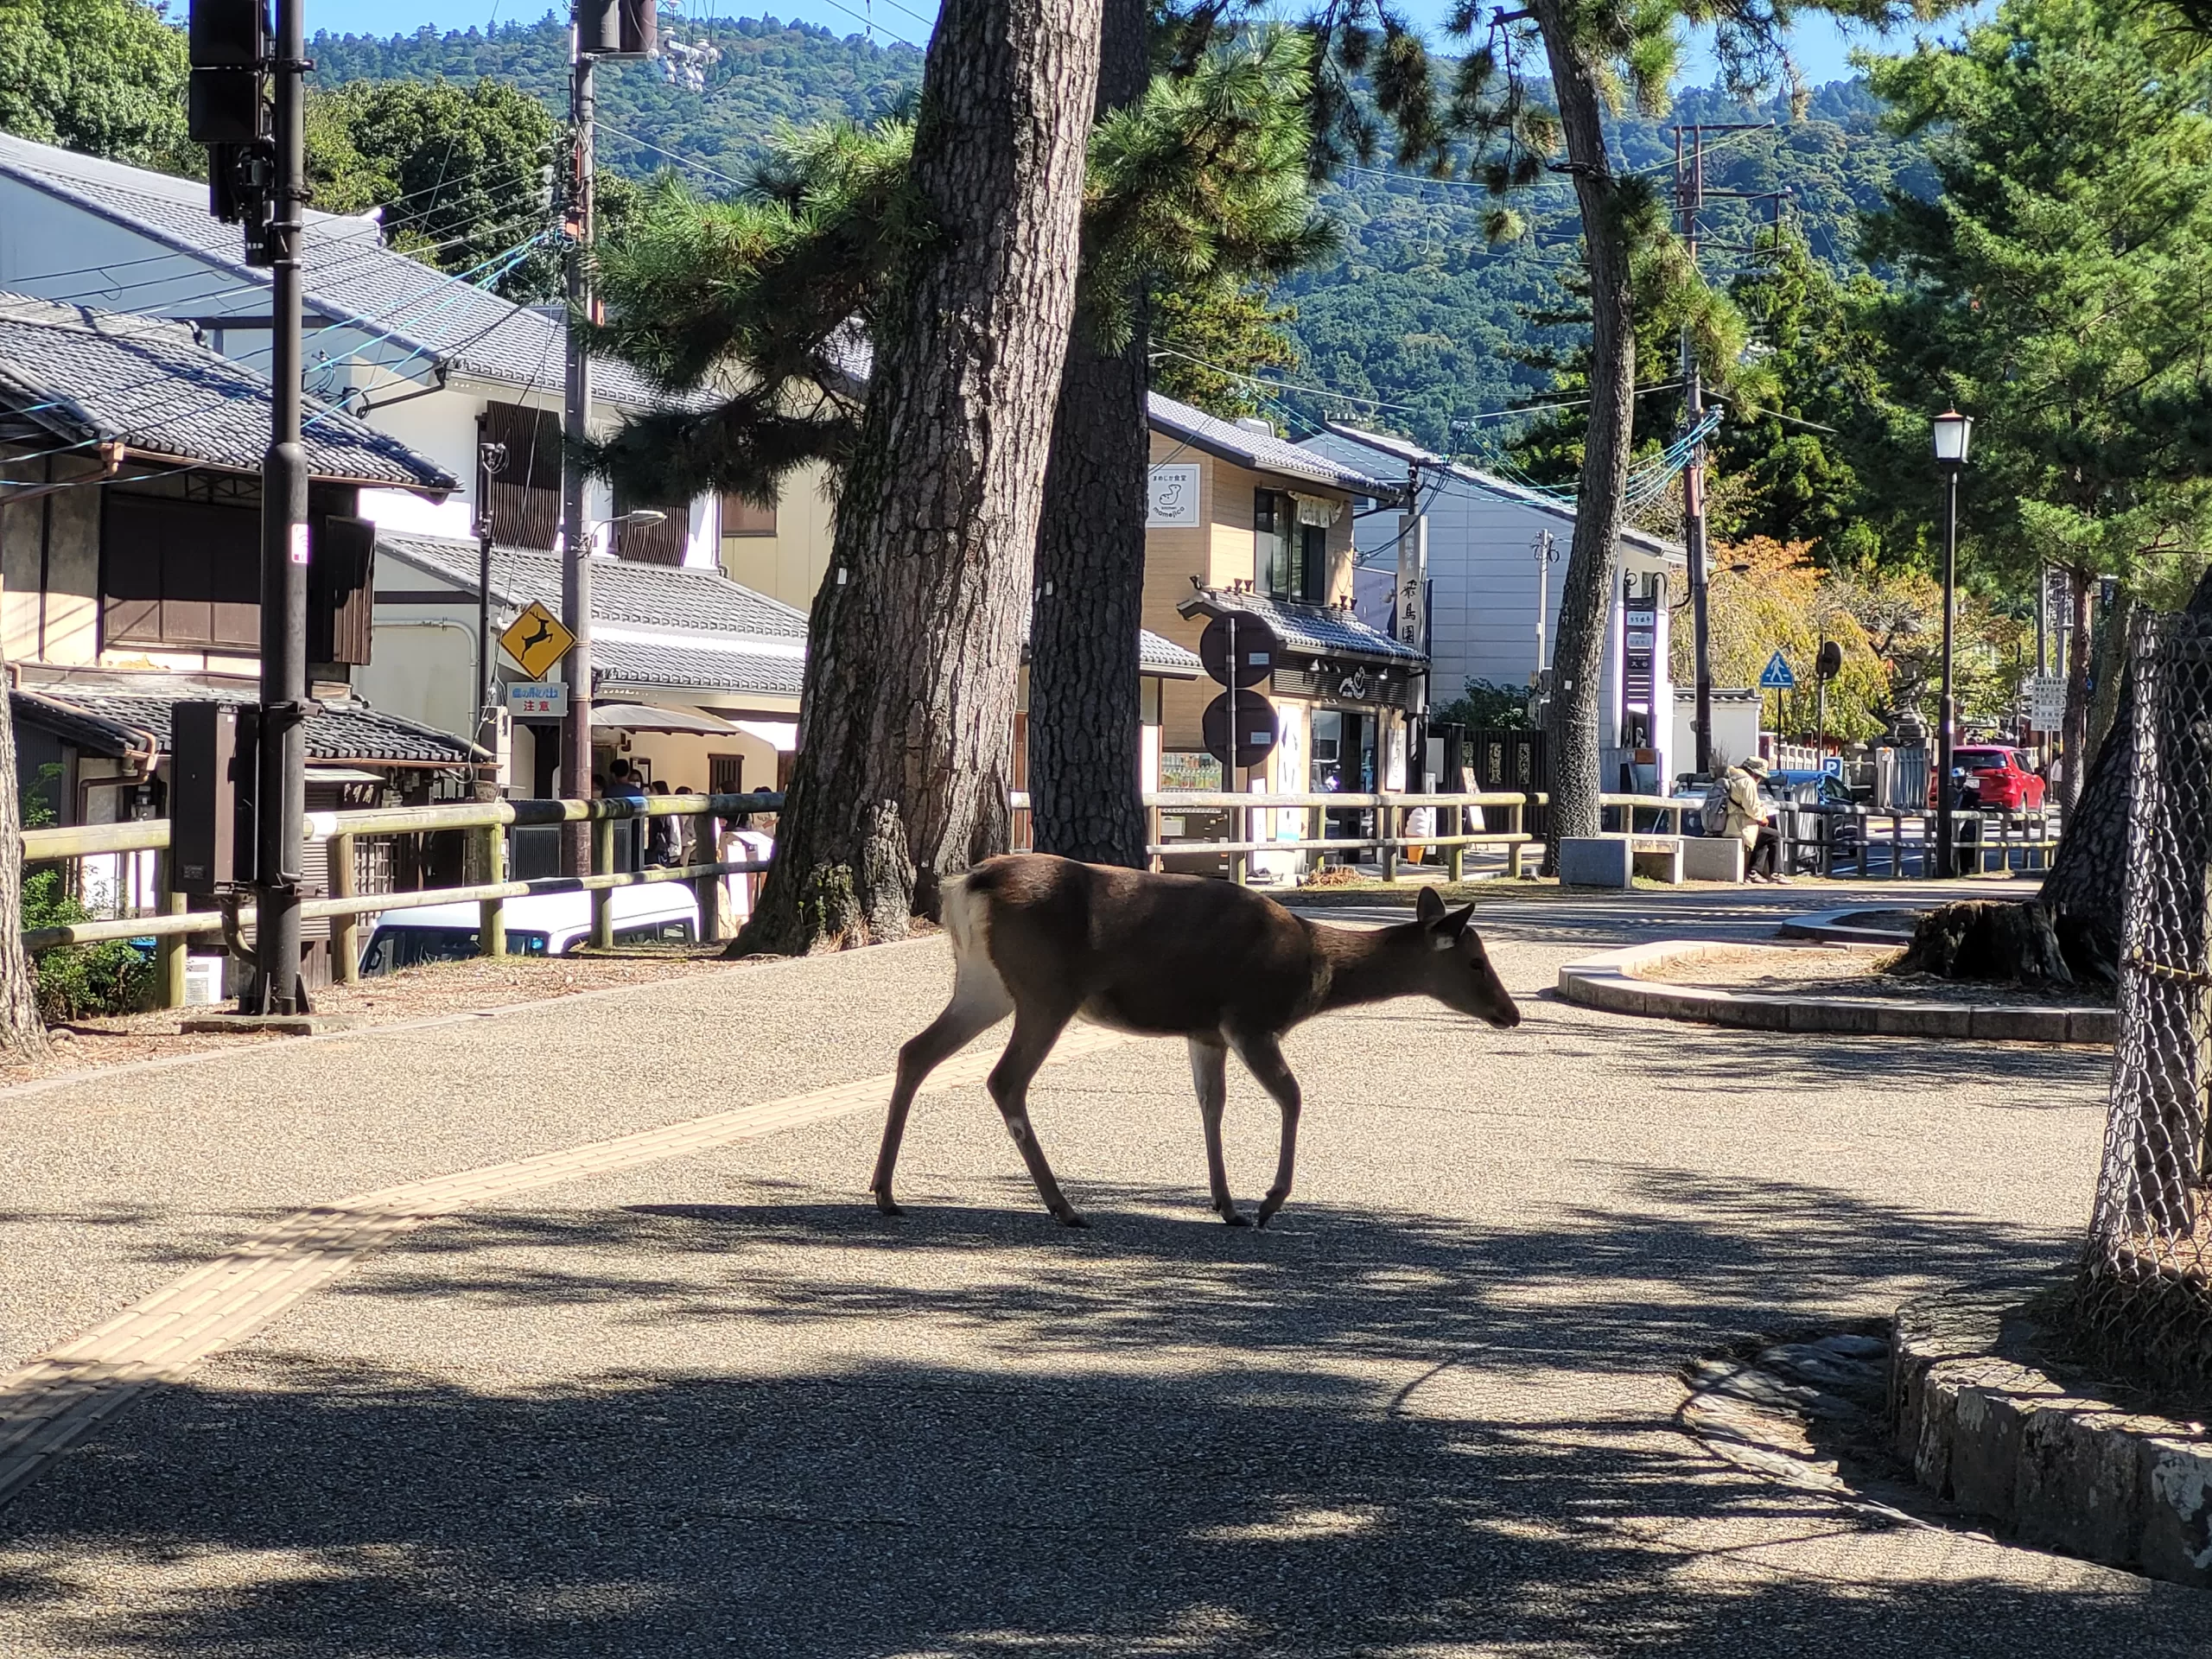 Nara Park is a free paradise for animal lovers